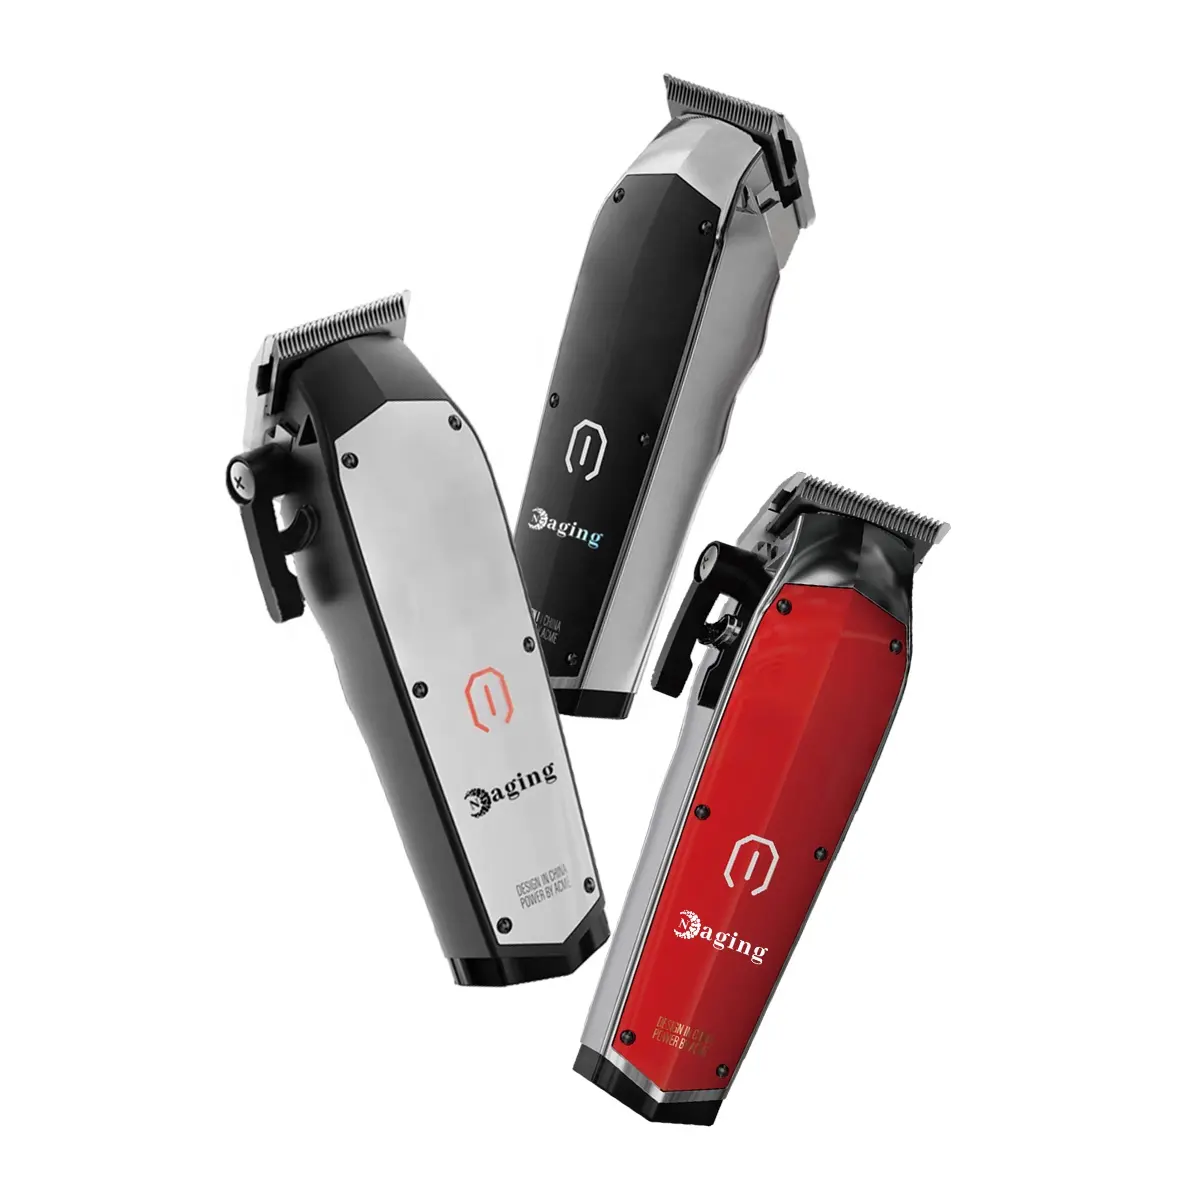 Portable gold professional zerp gapped cordless pet clippers all metal professional hair clipper